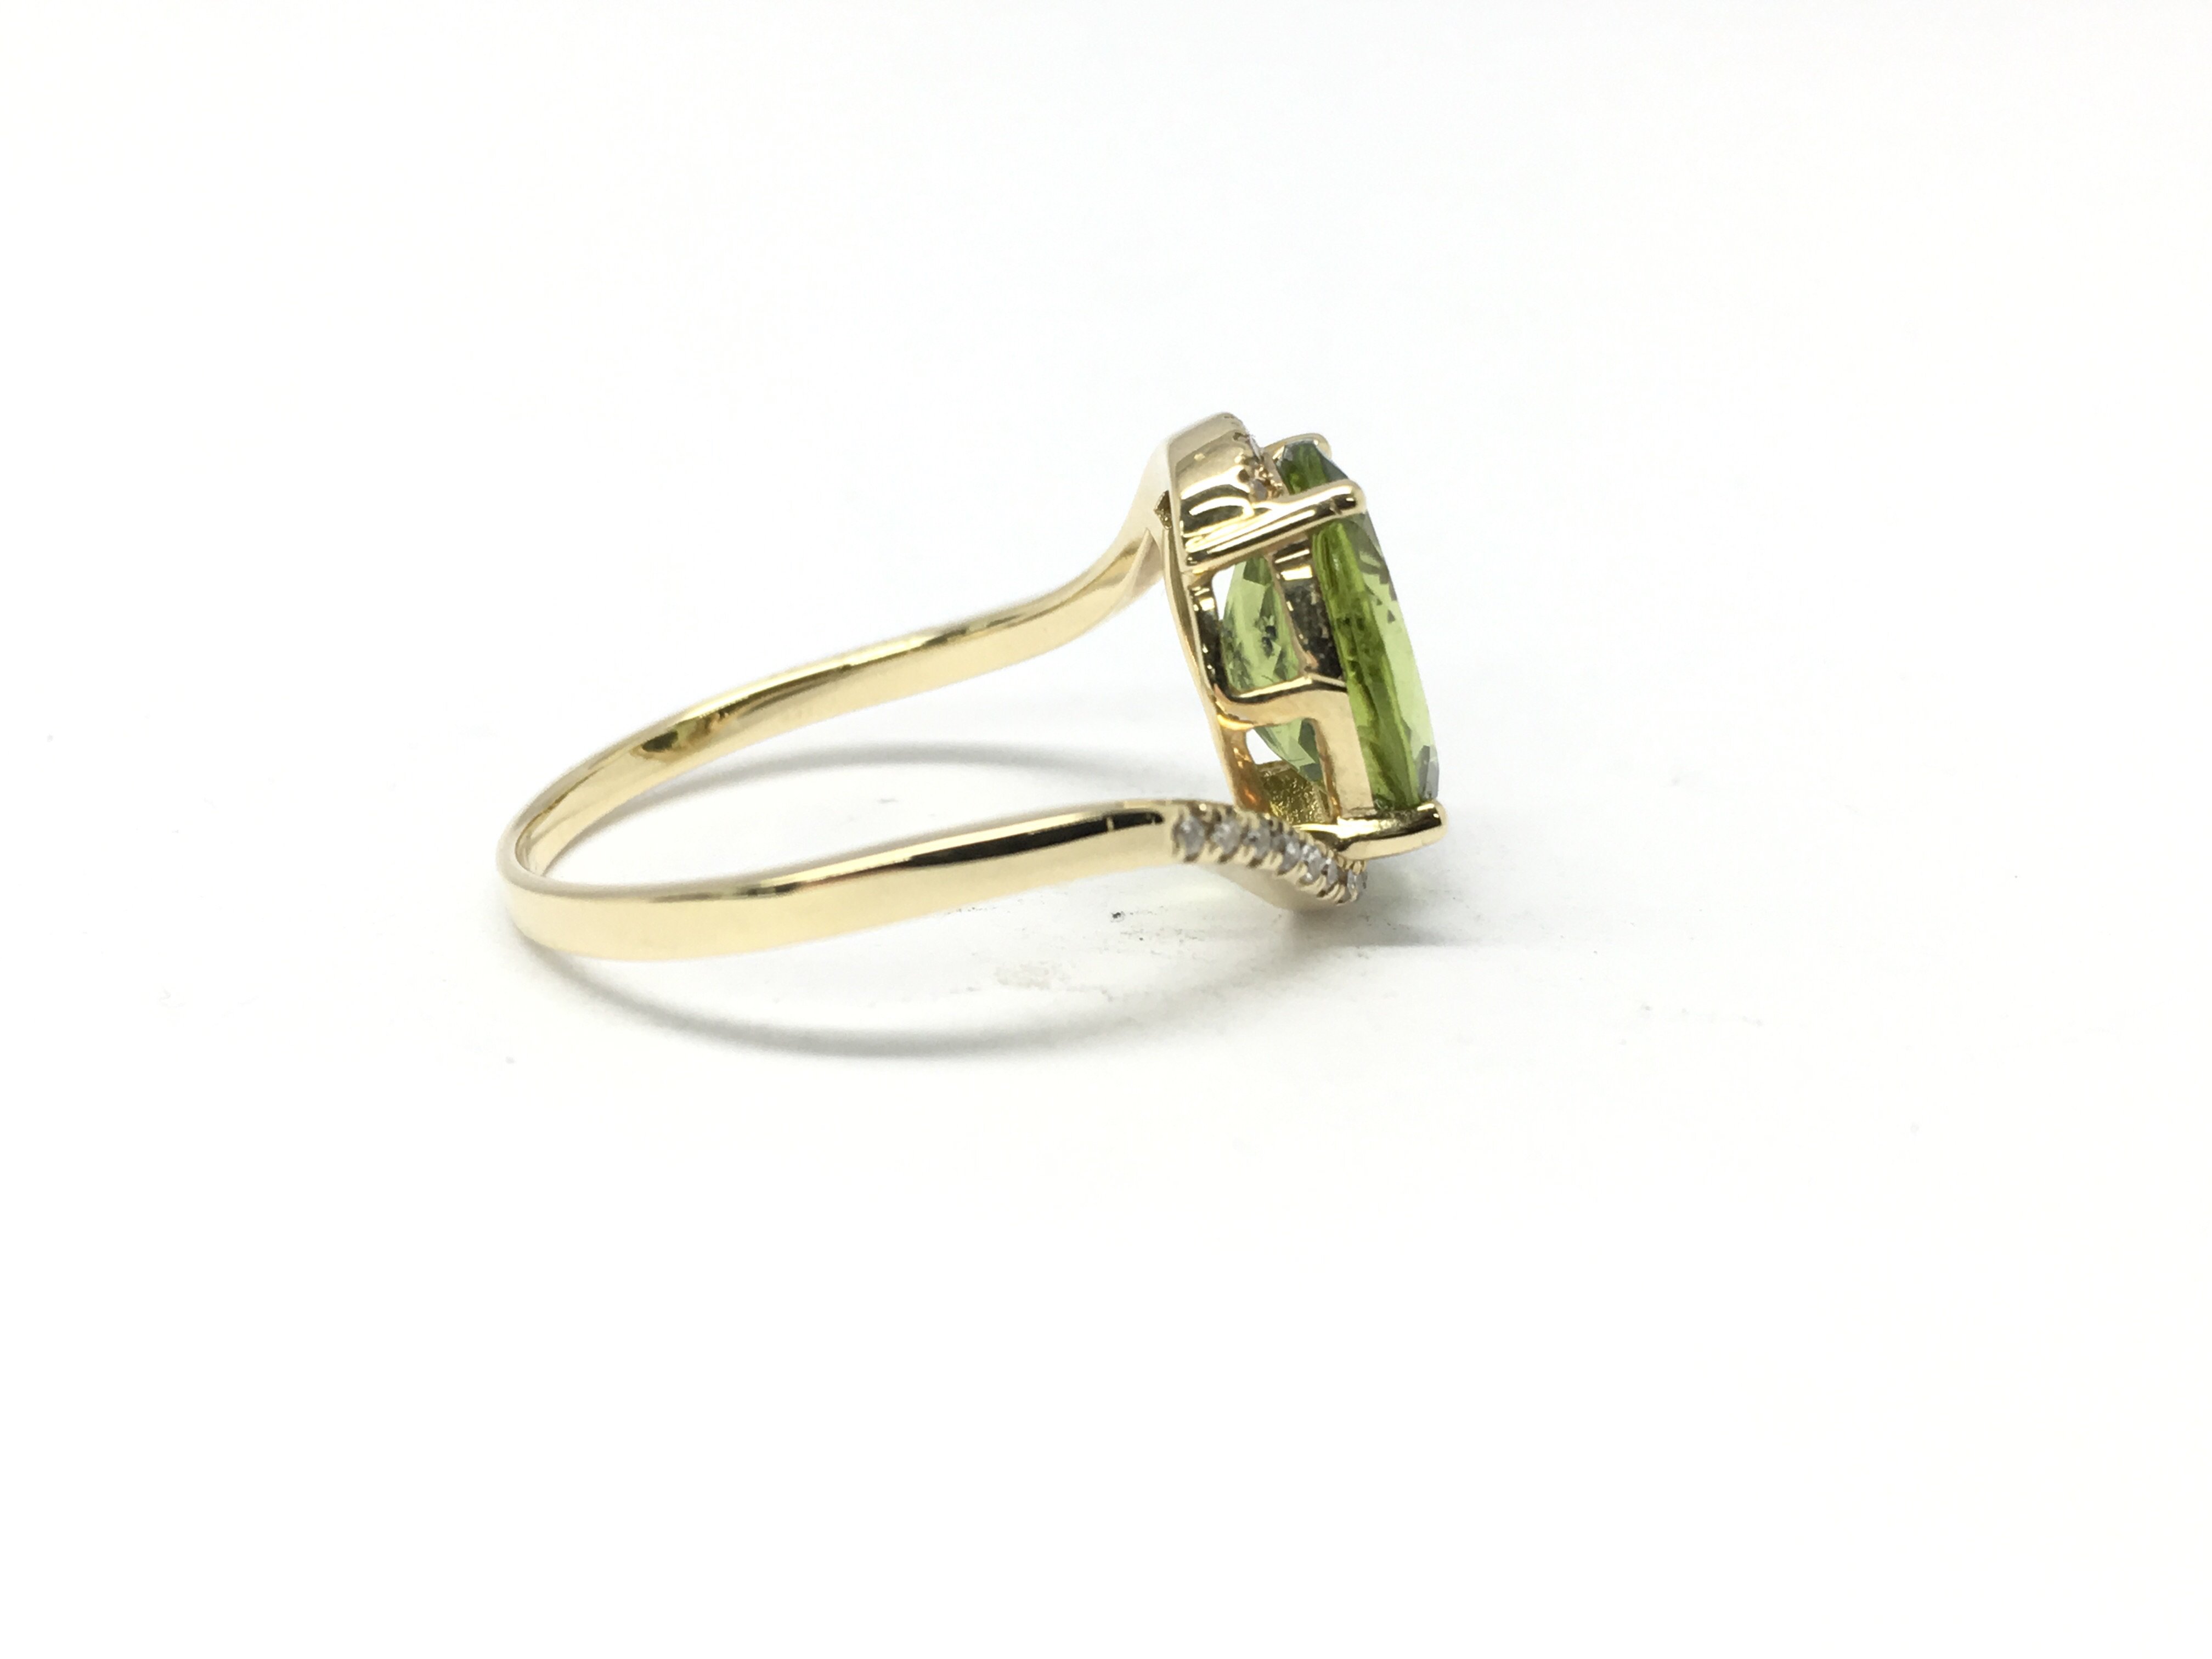 A 14ct gold and diamond ring set with an oval cut - Image 2 of 2